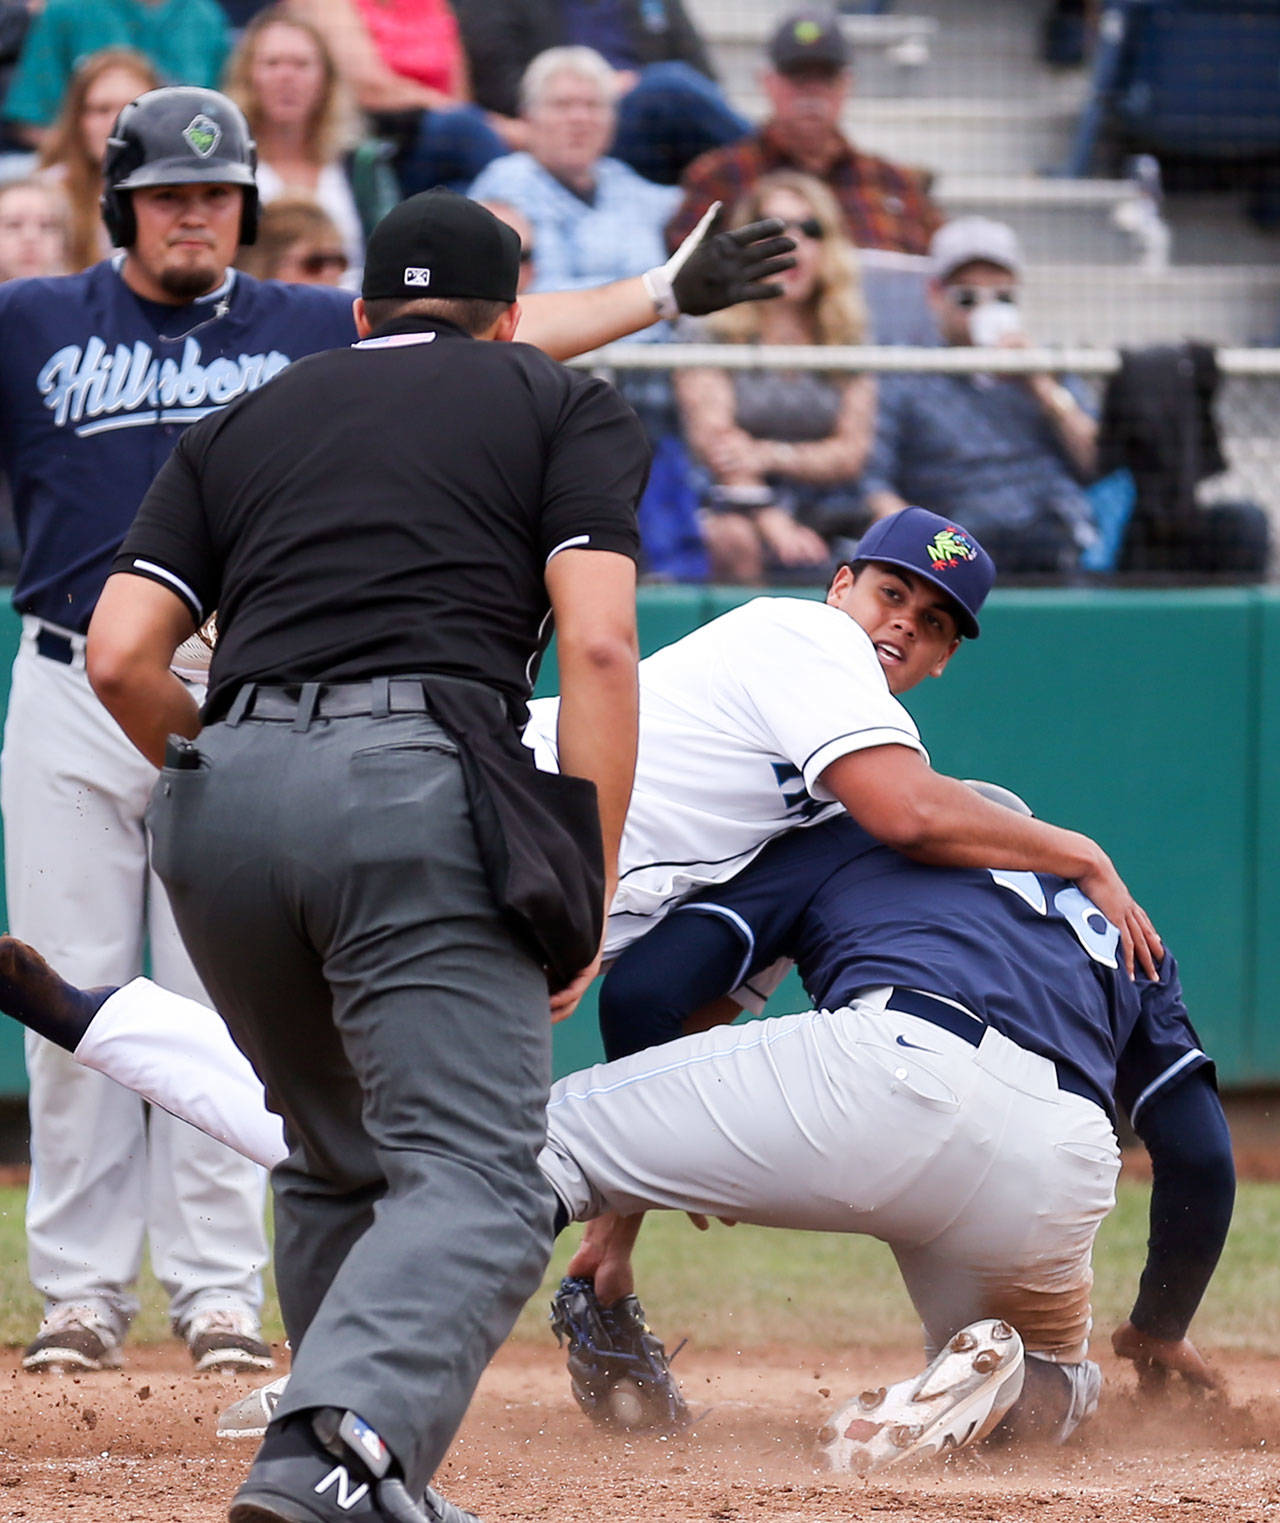 Everett’s Andres Torres looks for the call as he tags out Hillsboro’s Eudy Ramos Sunday afternoon at Everett Memorial Stadium in Everett on June 18, 2017. Aquasox won 6-3. (Kevin Clark / The Herald)